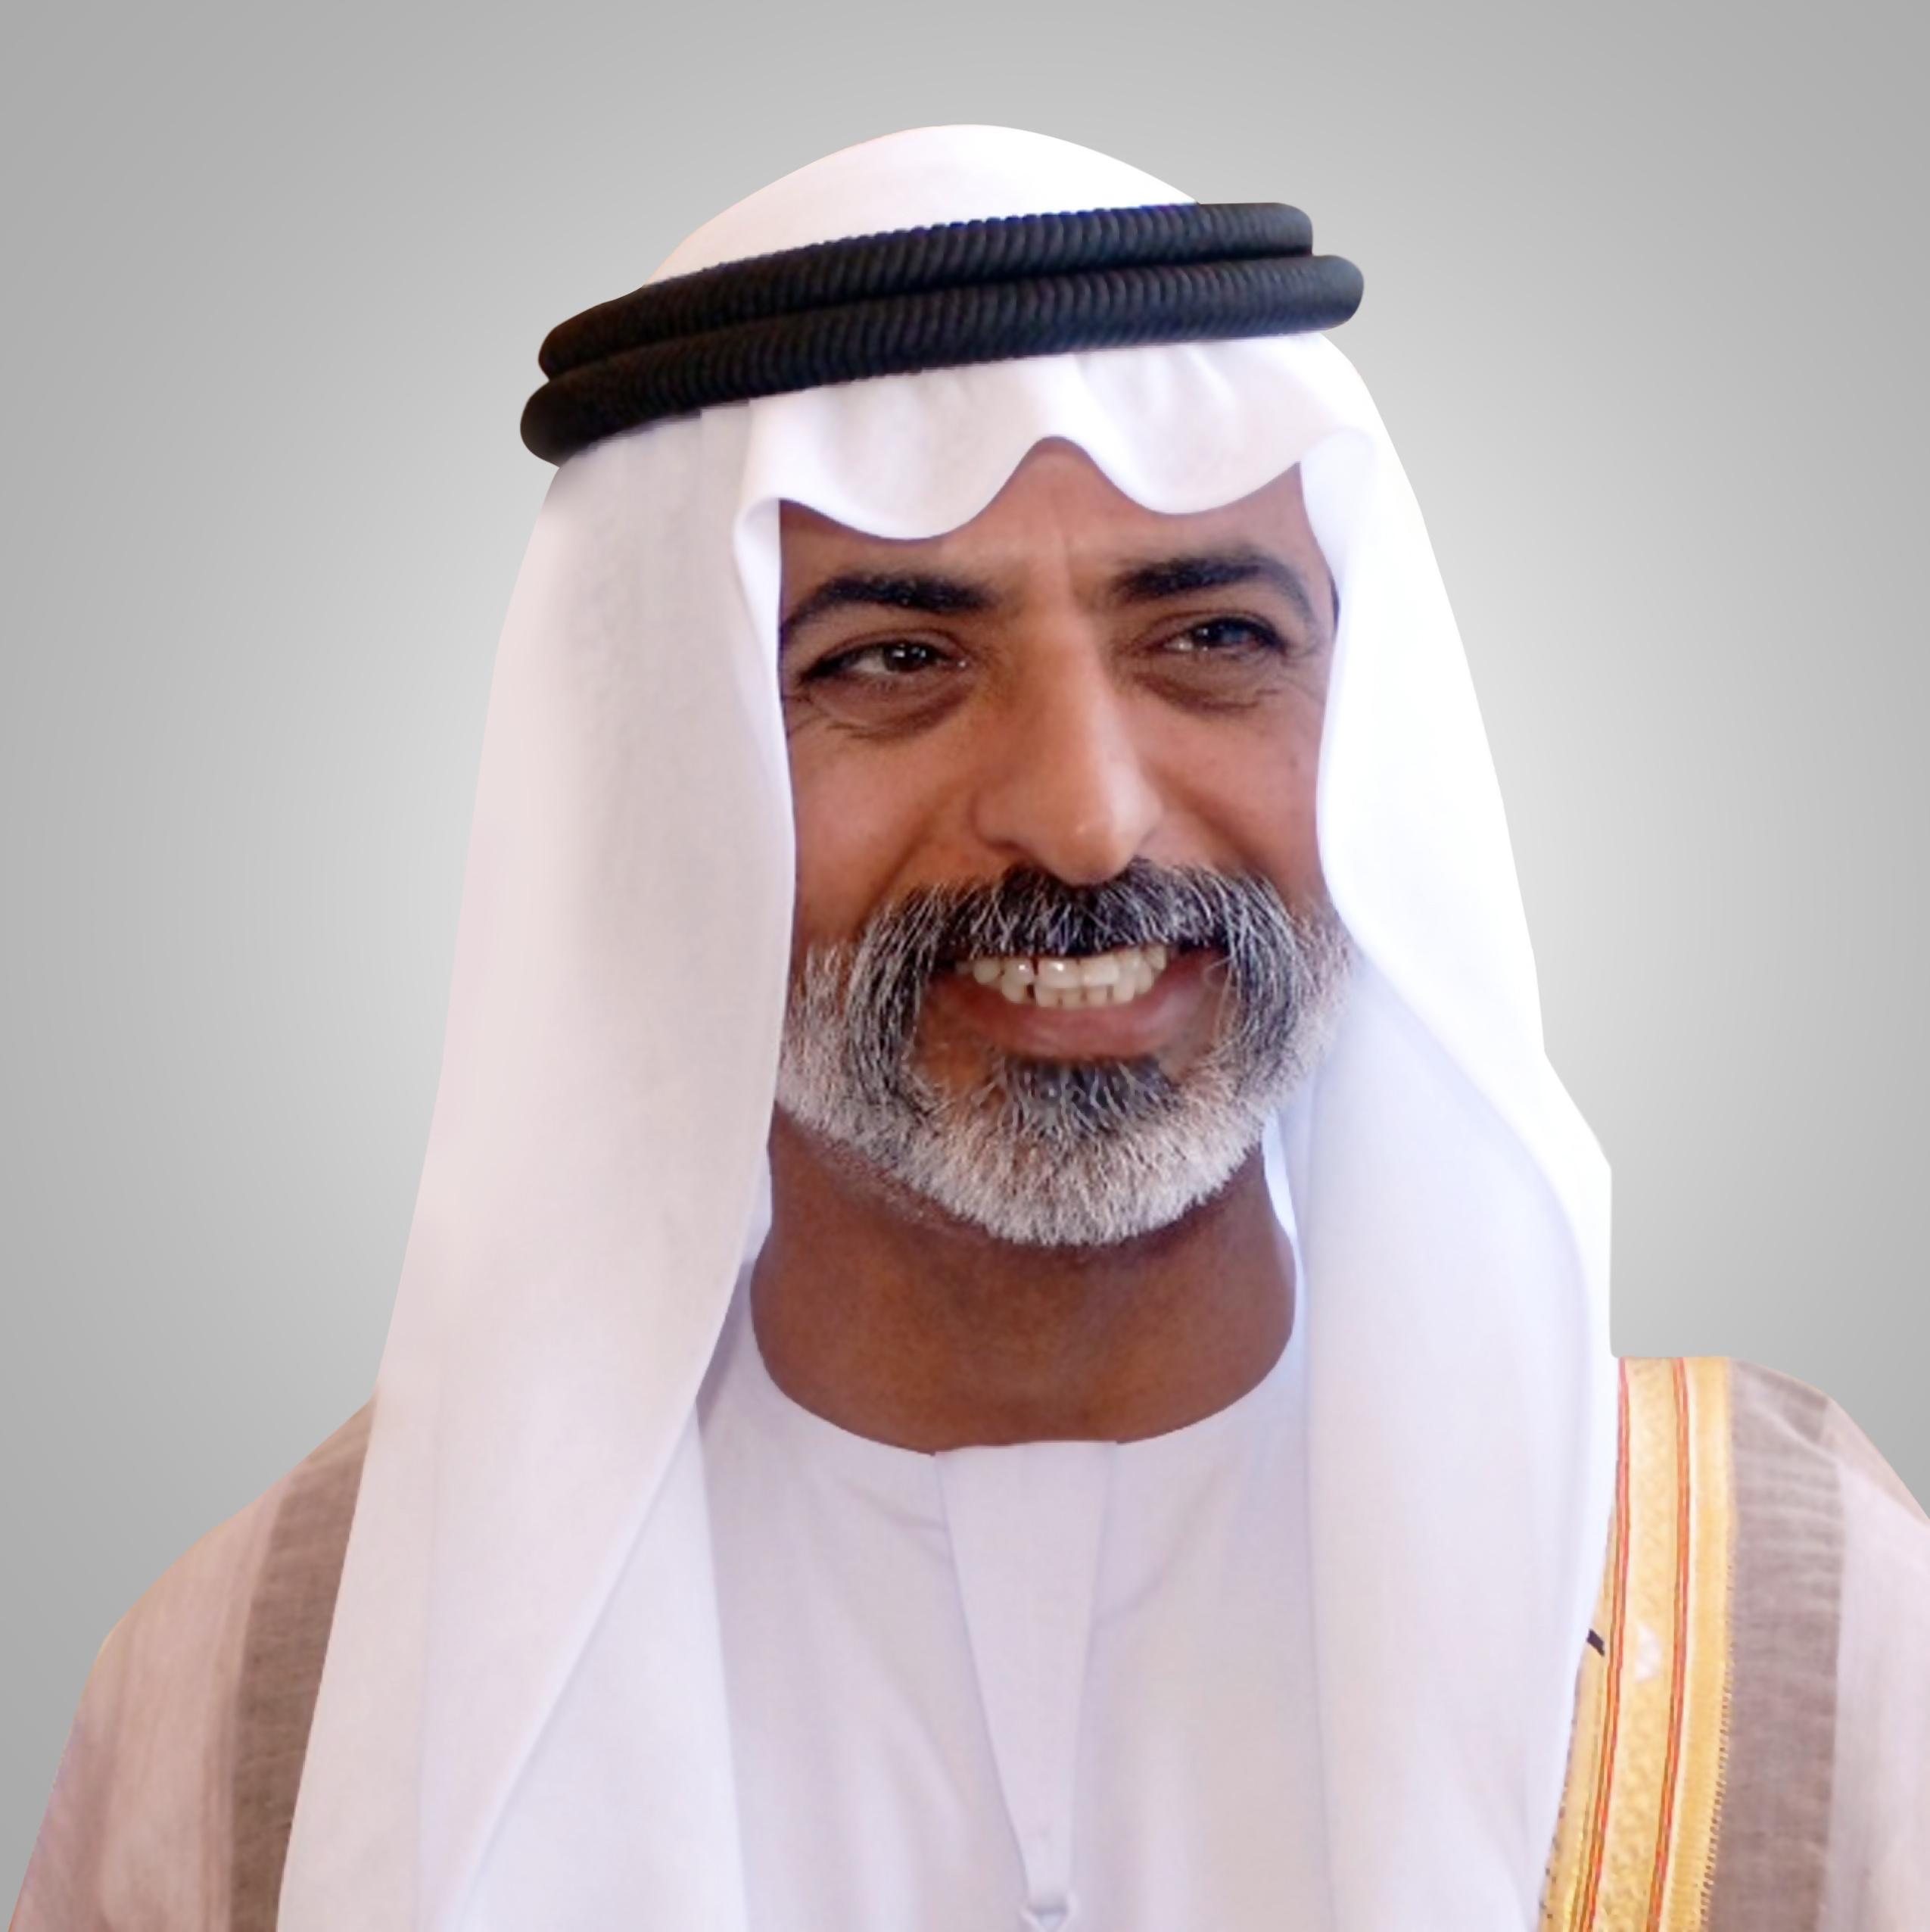 Abu Dhabi Hosts International Dialogue Of Civilizations And Tolerance  Conference Next Week